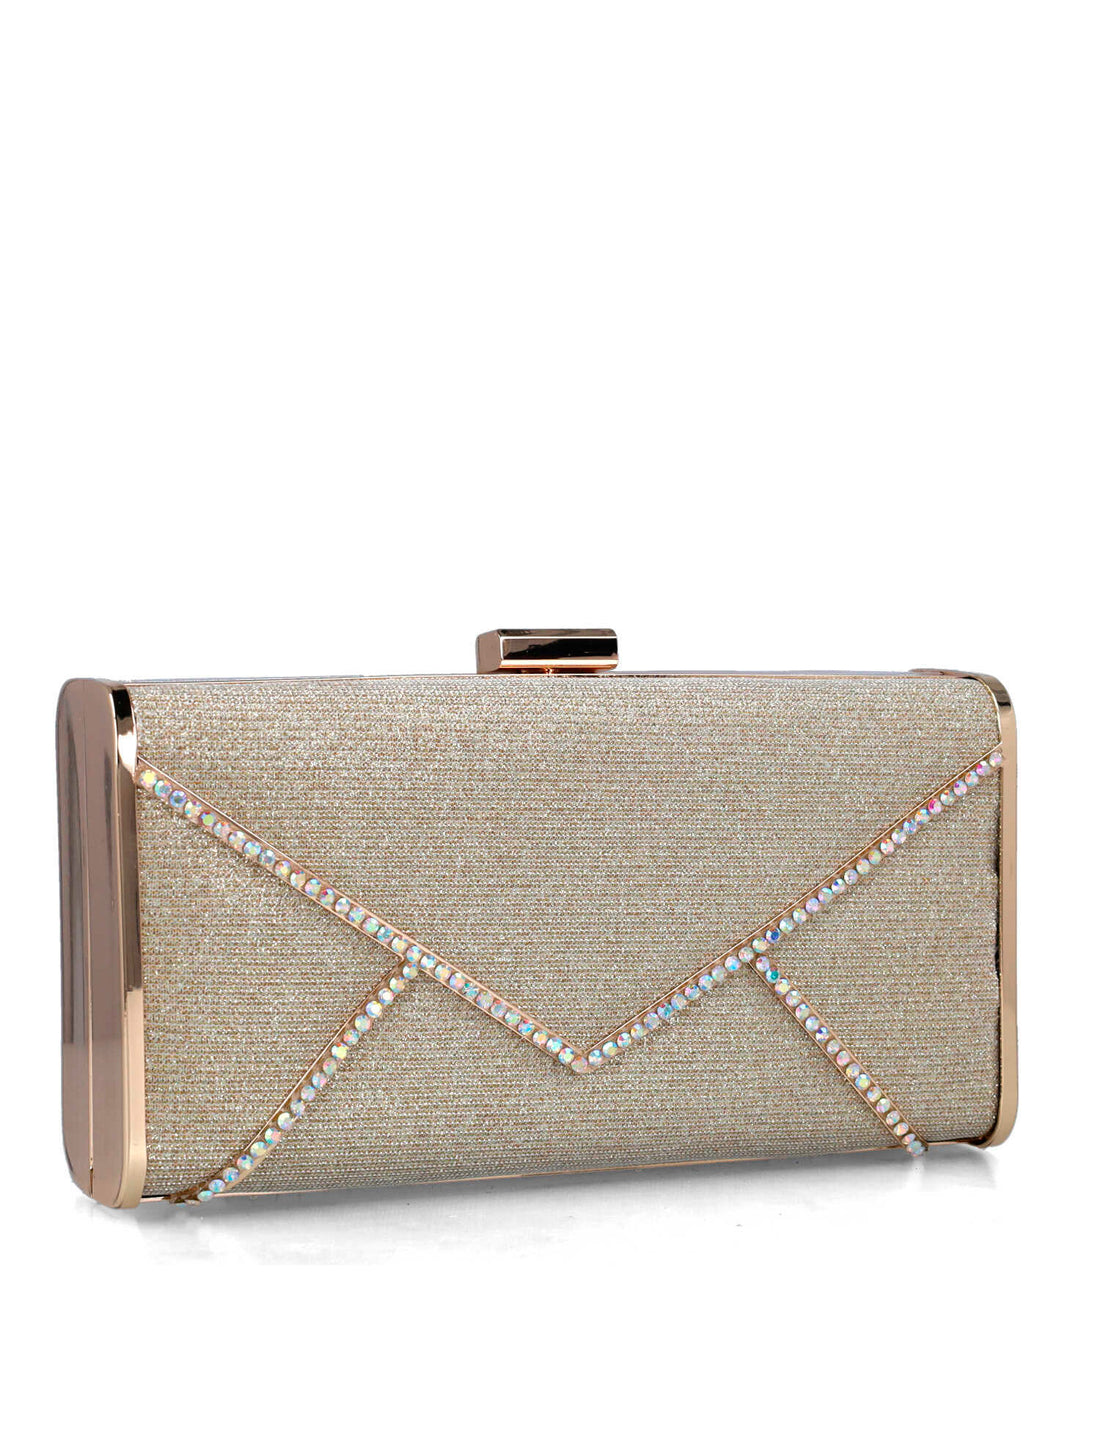 Beige Clutch With Gold Hardware_85656_00_02